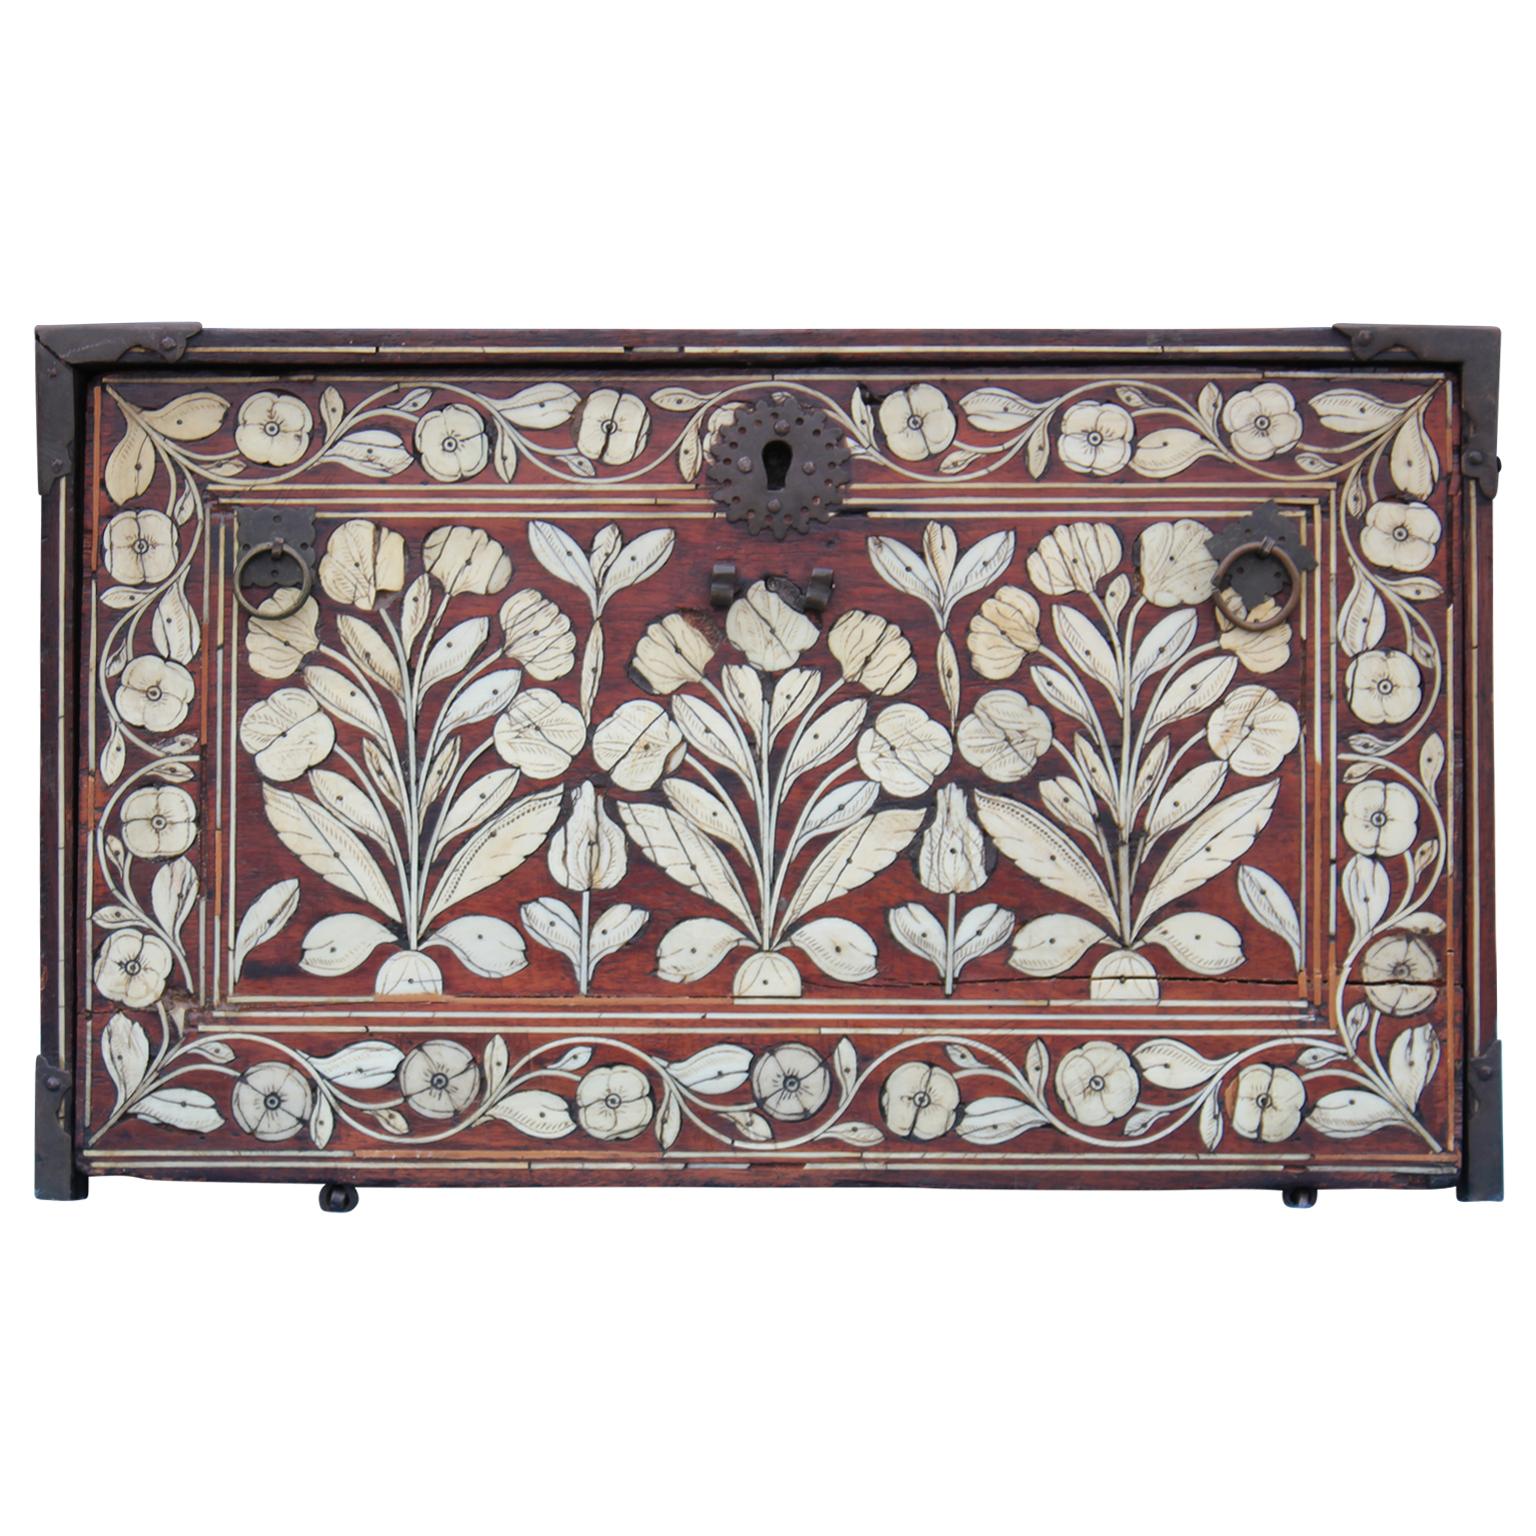 Stunning bone-inlaid box. Box has hinged drop-front opening to reveal nine drawers. Can be used decoratively, for jewelry, make-up, or medicine. Some missing pieces will need repair.

17th-18th century.